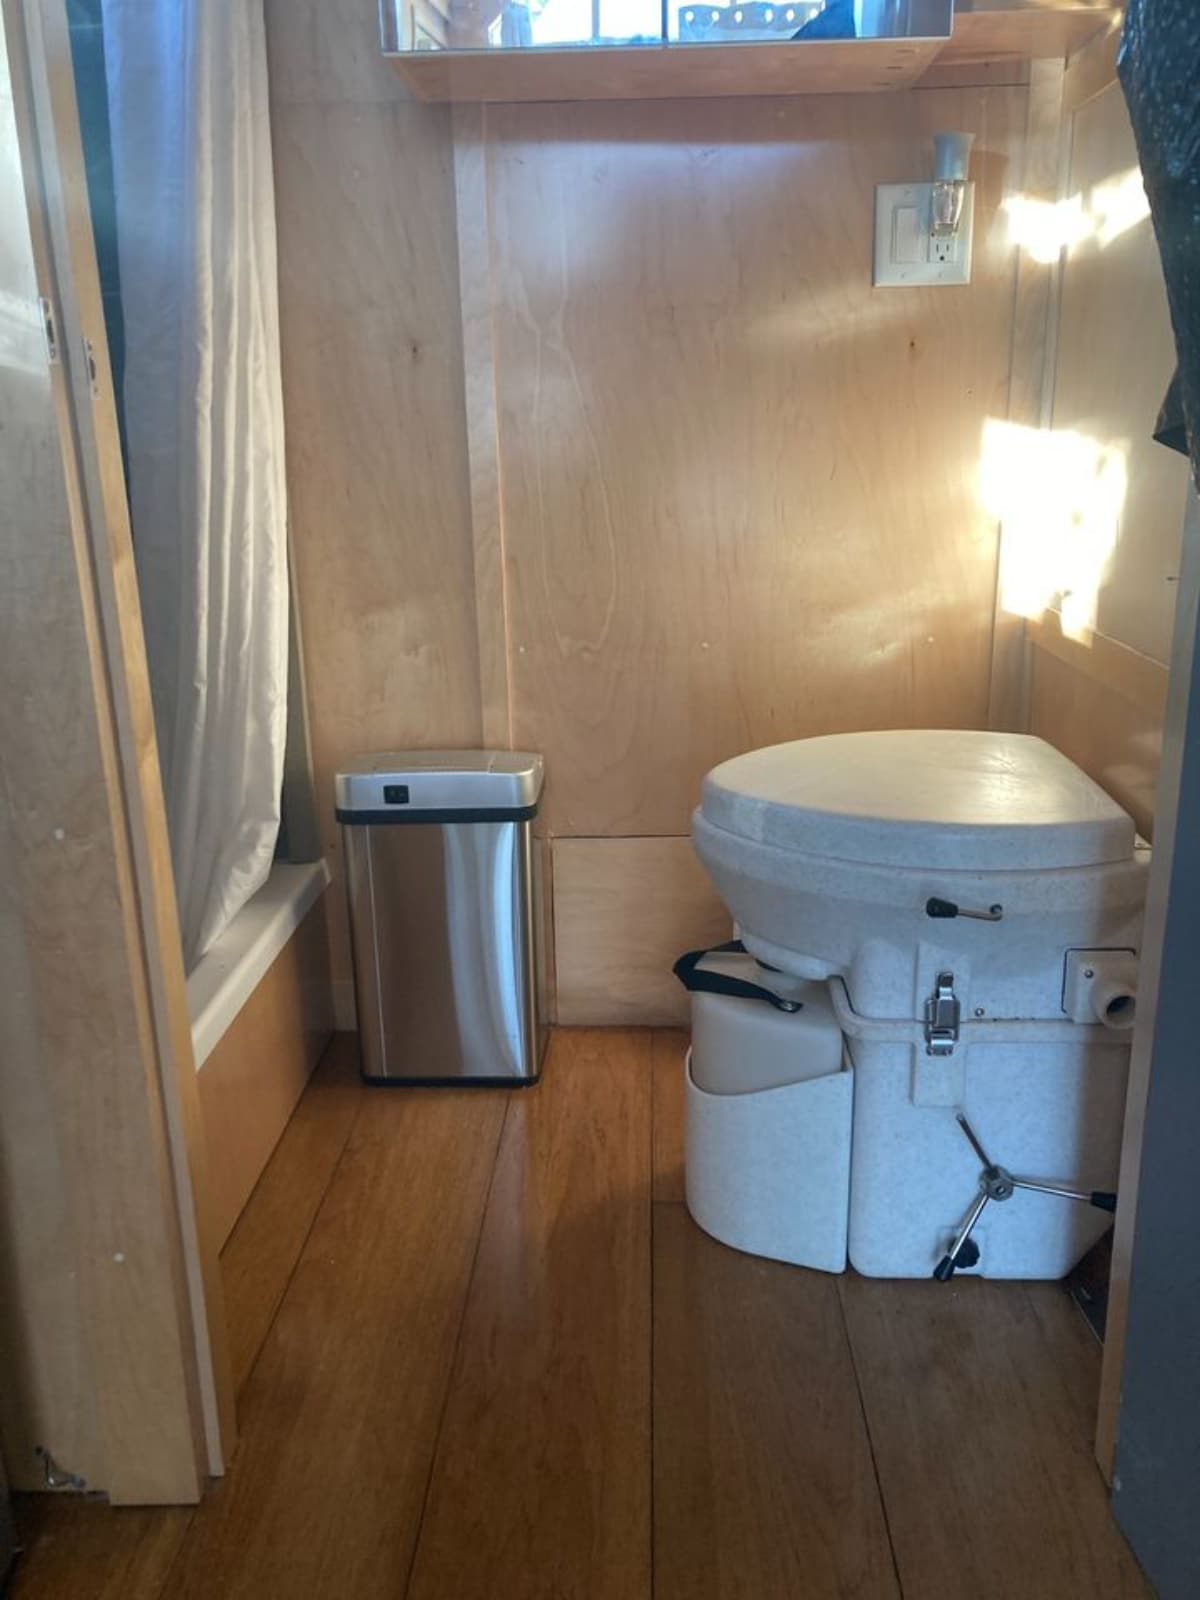 Toilet area of 221 sf Beautiful Tiny Home